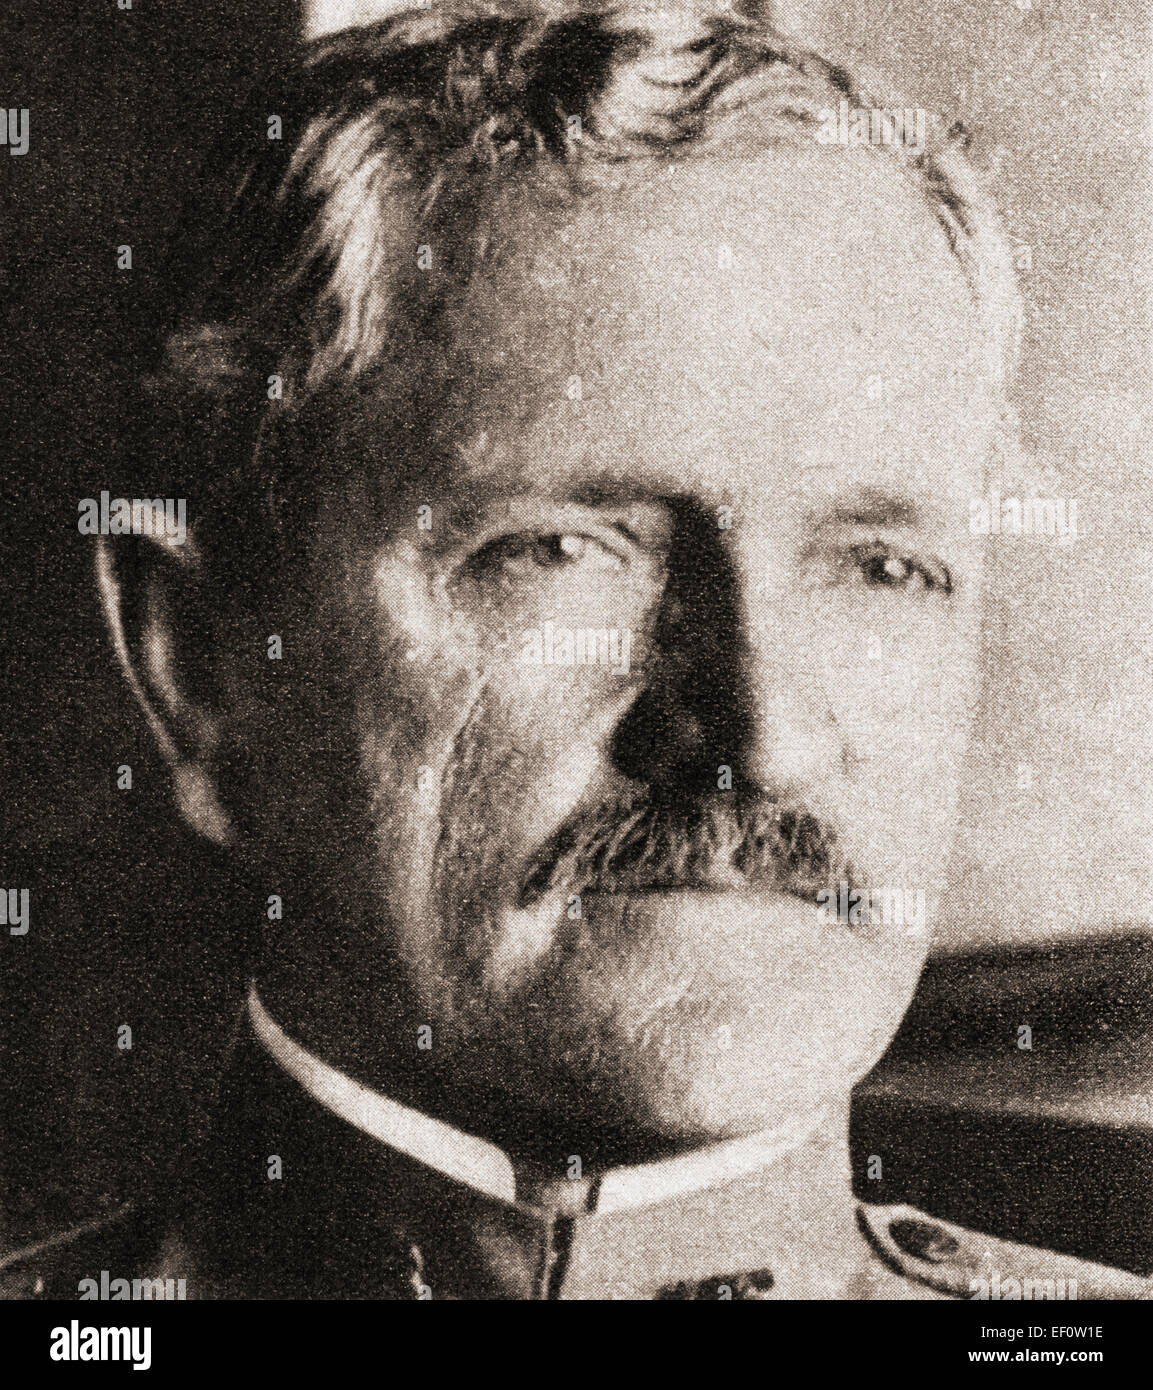 John Joseph 'Black Jack' Pershing,  1860 – 1948.   United States Army general who led the American Expeditionary Forces to victory over Germany in World War I. Stock Photo